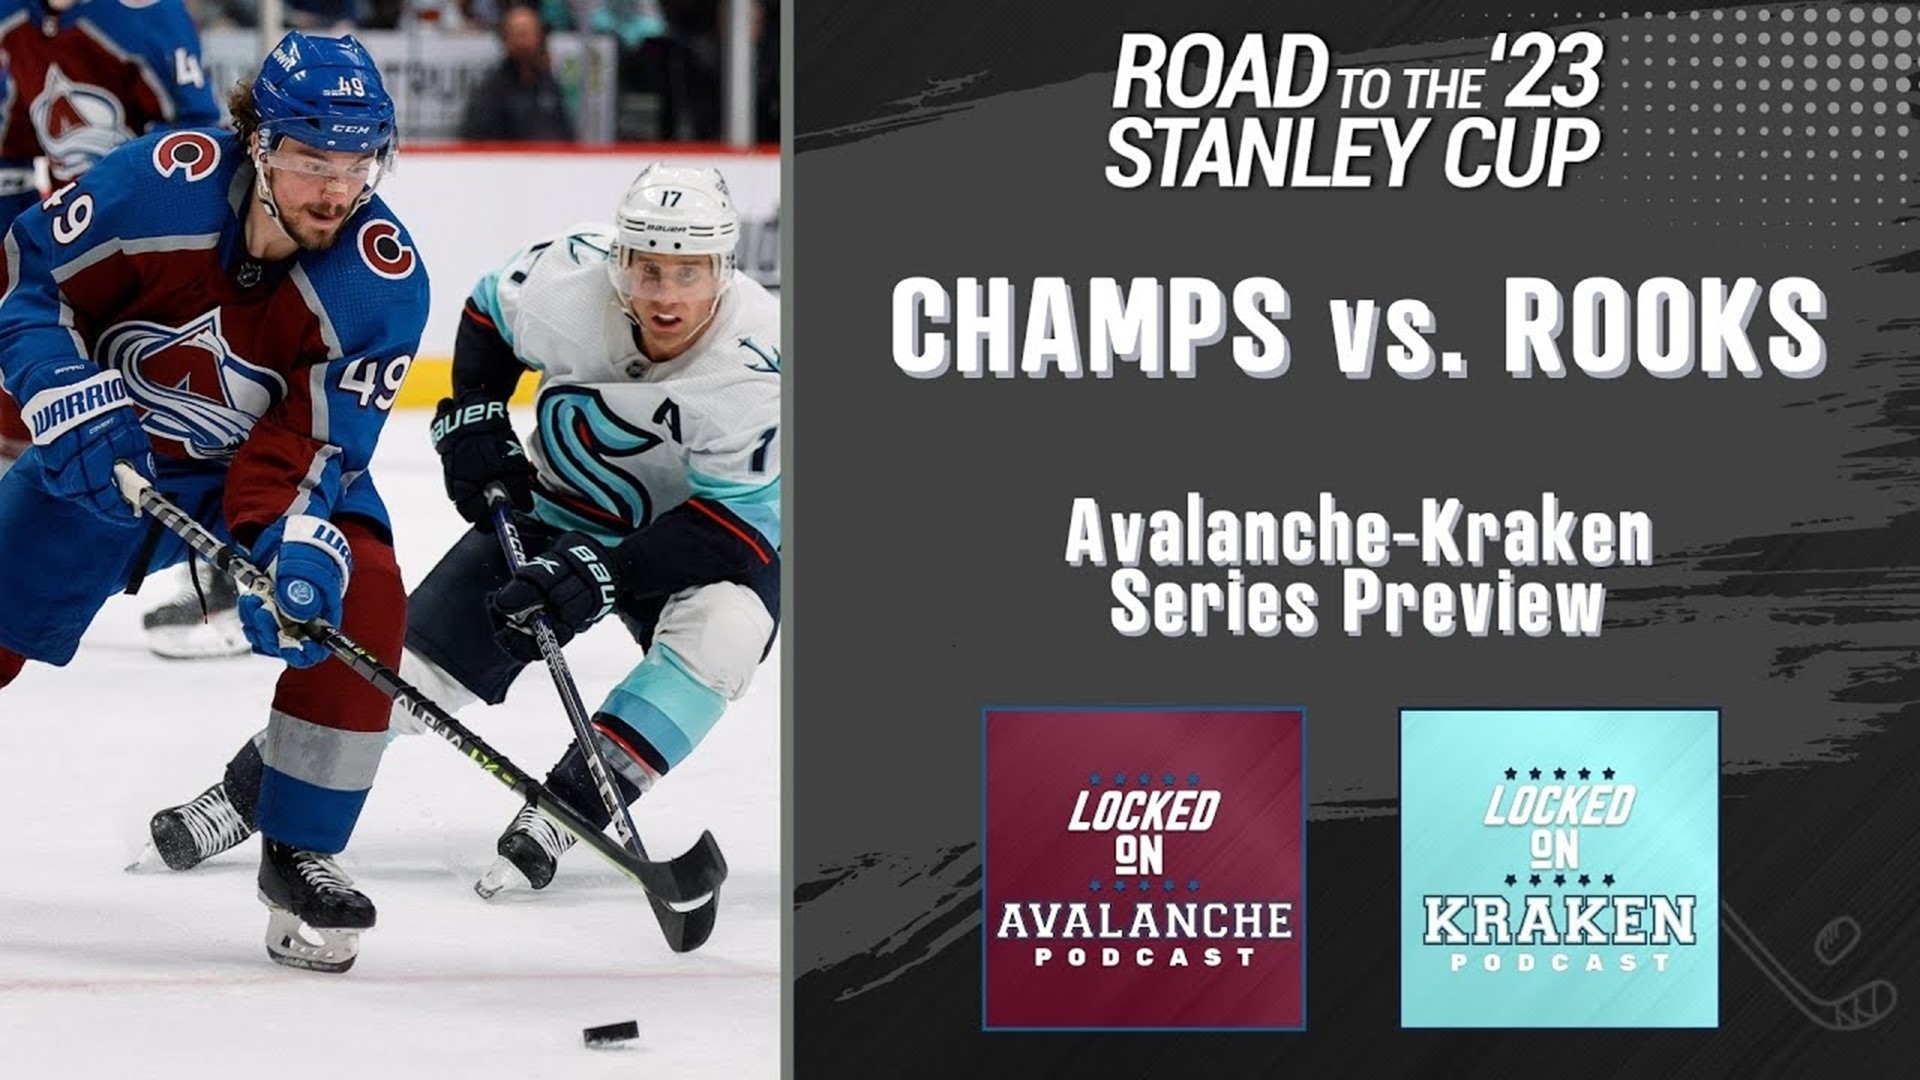 How to Watch the Avalanche vs. Kraken Game: Streaming & TV Info